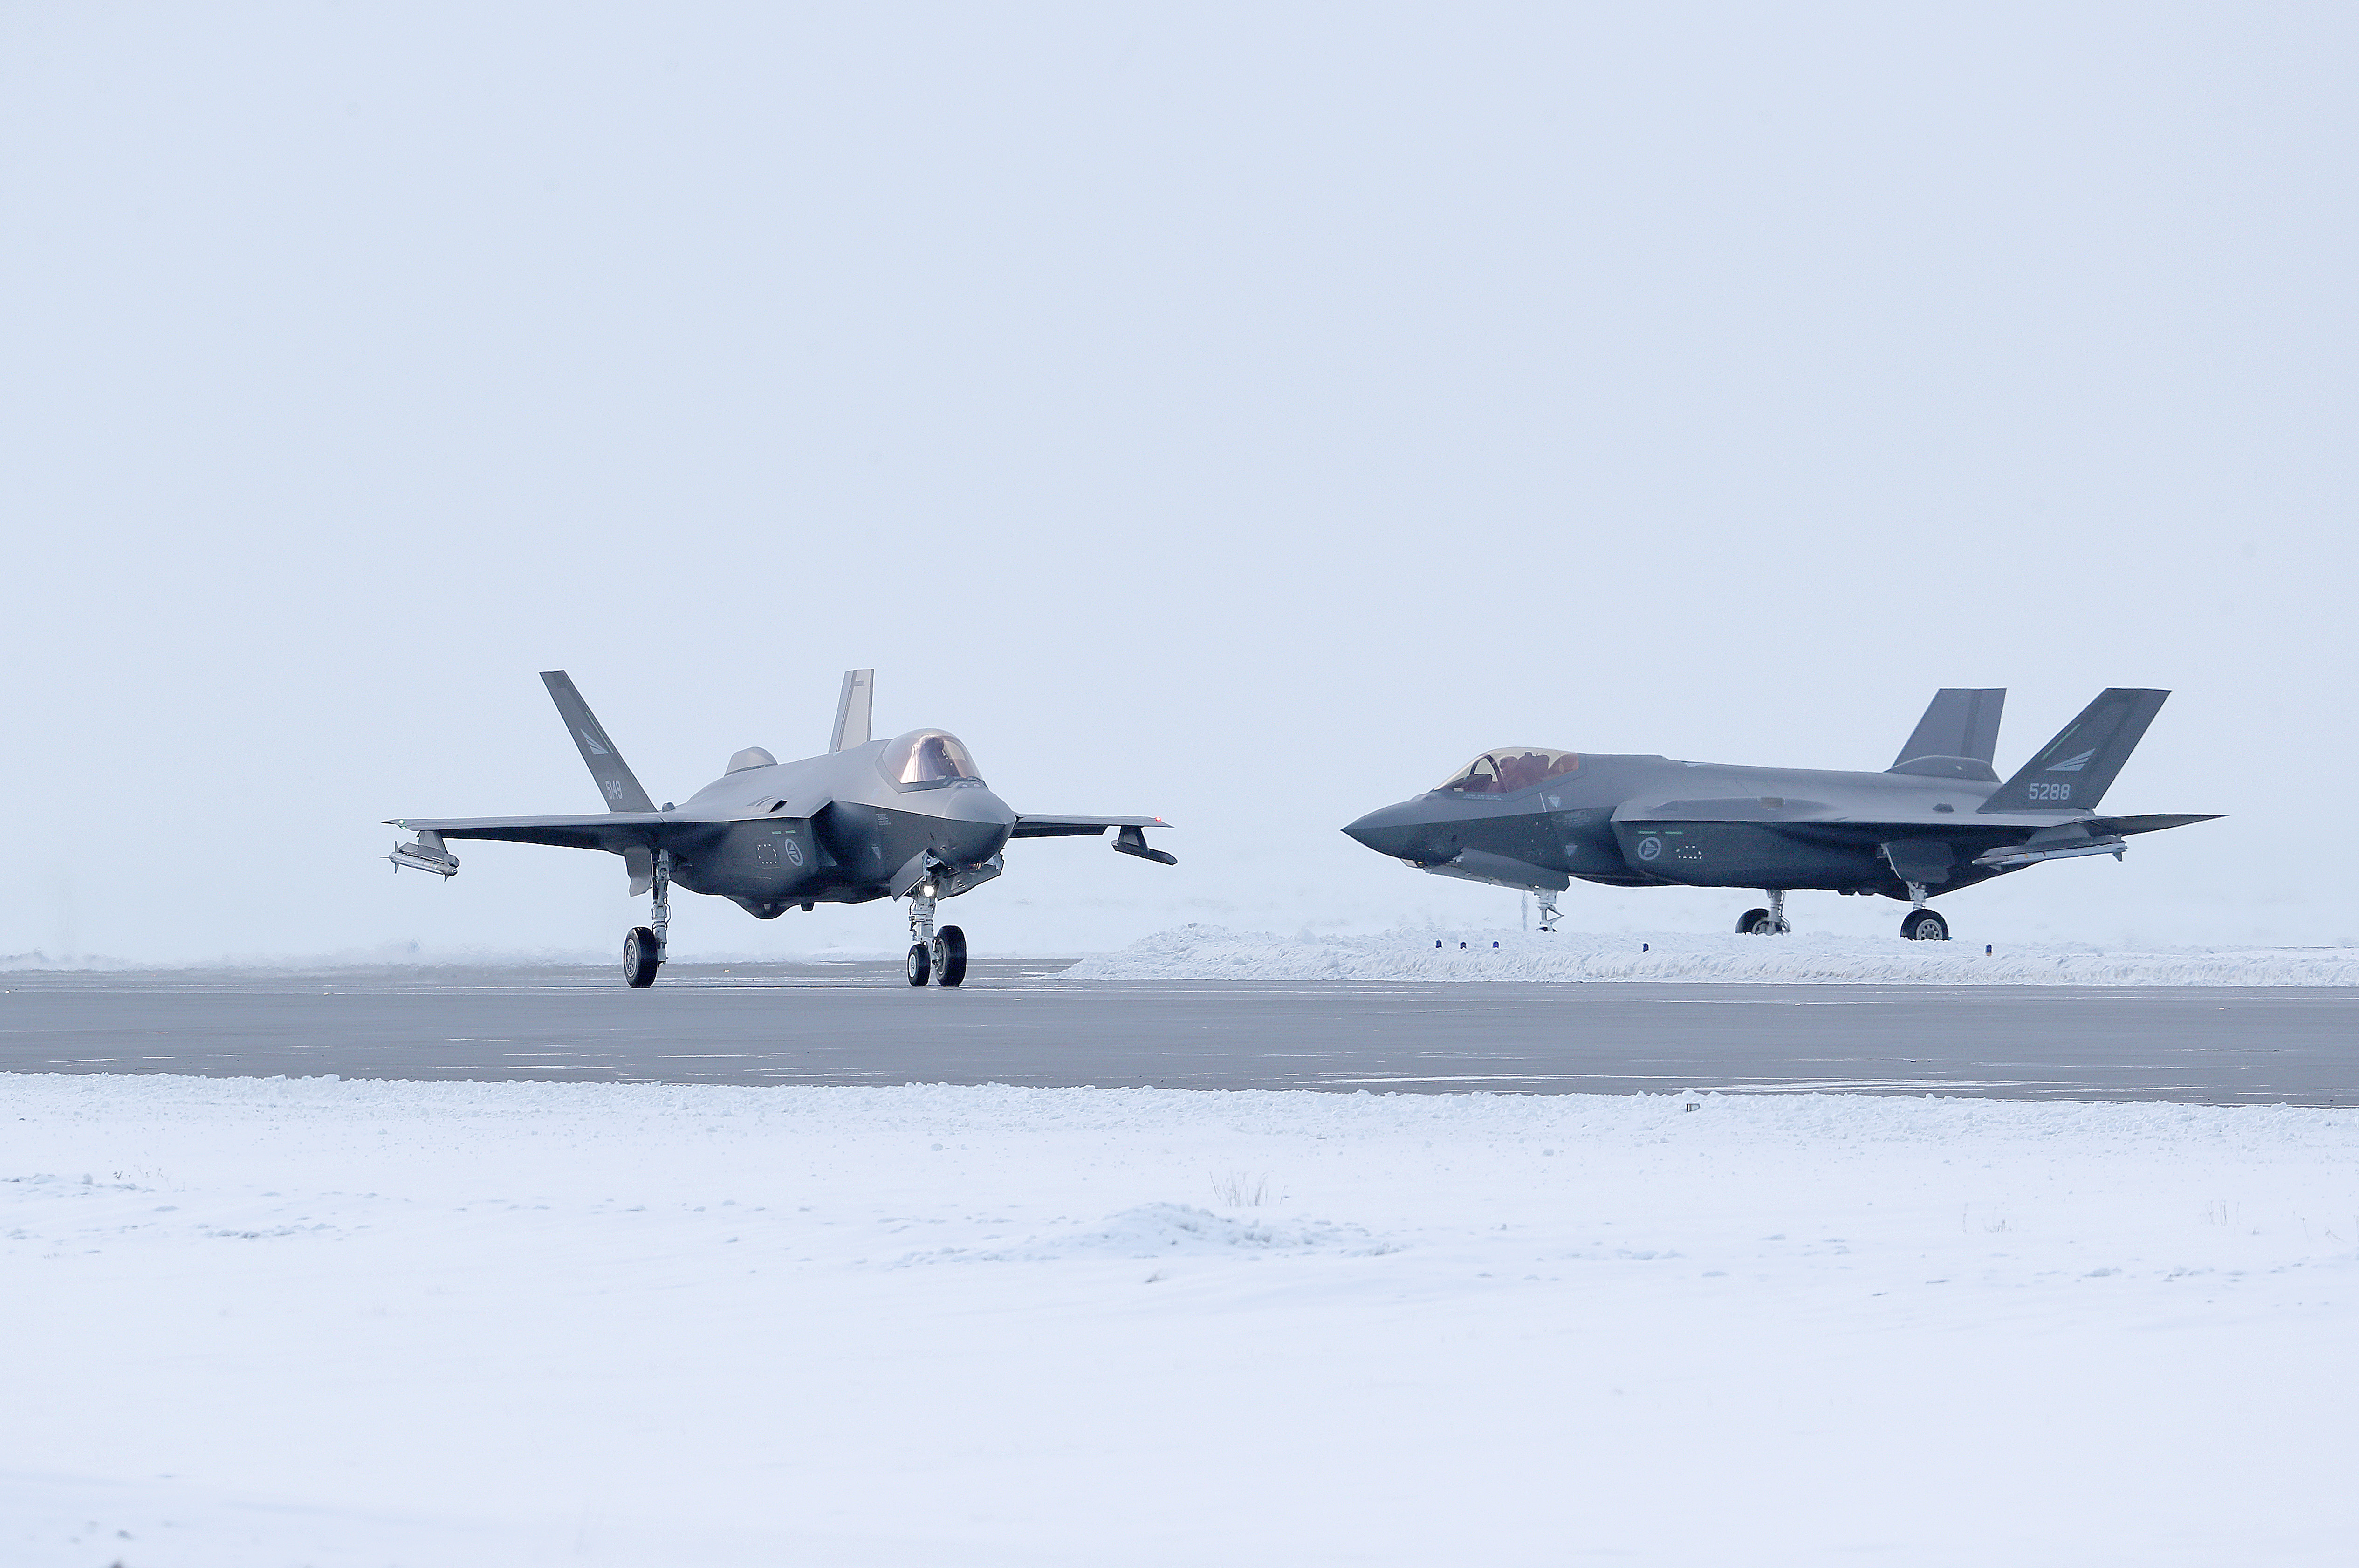 Norway S New F 35 Scrambled For First Time To Meet Russian Anti